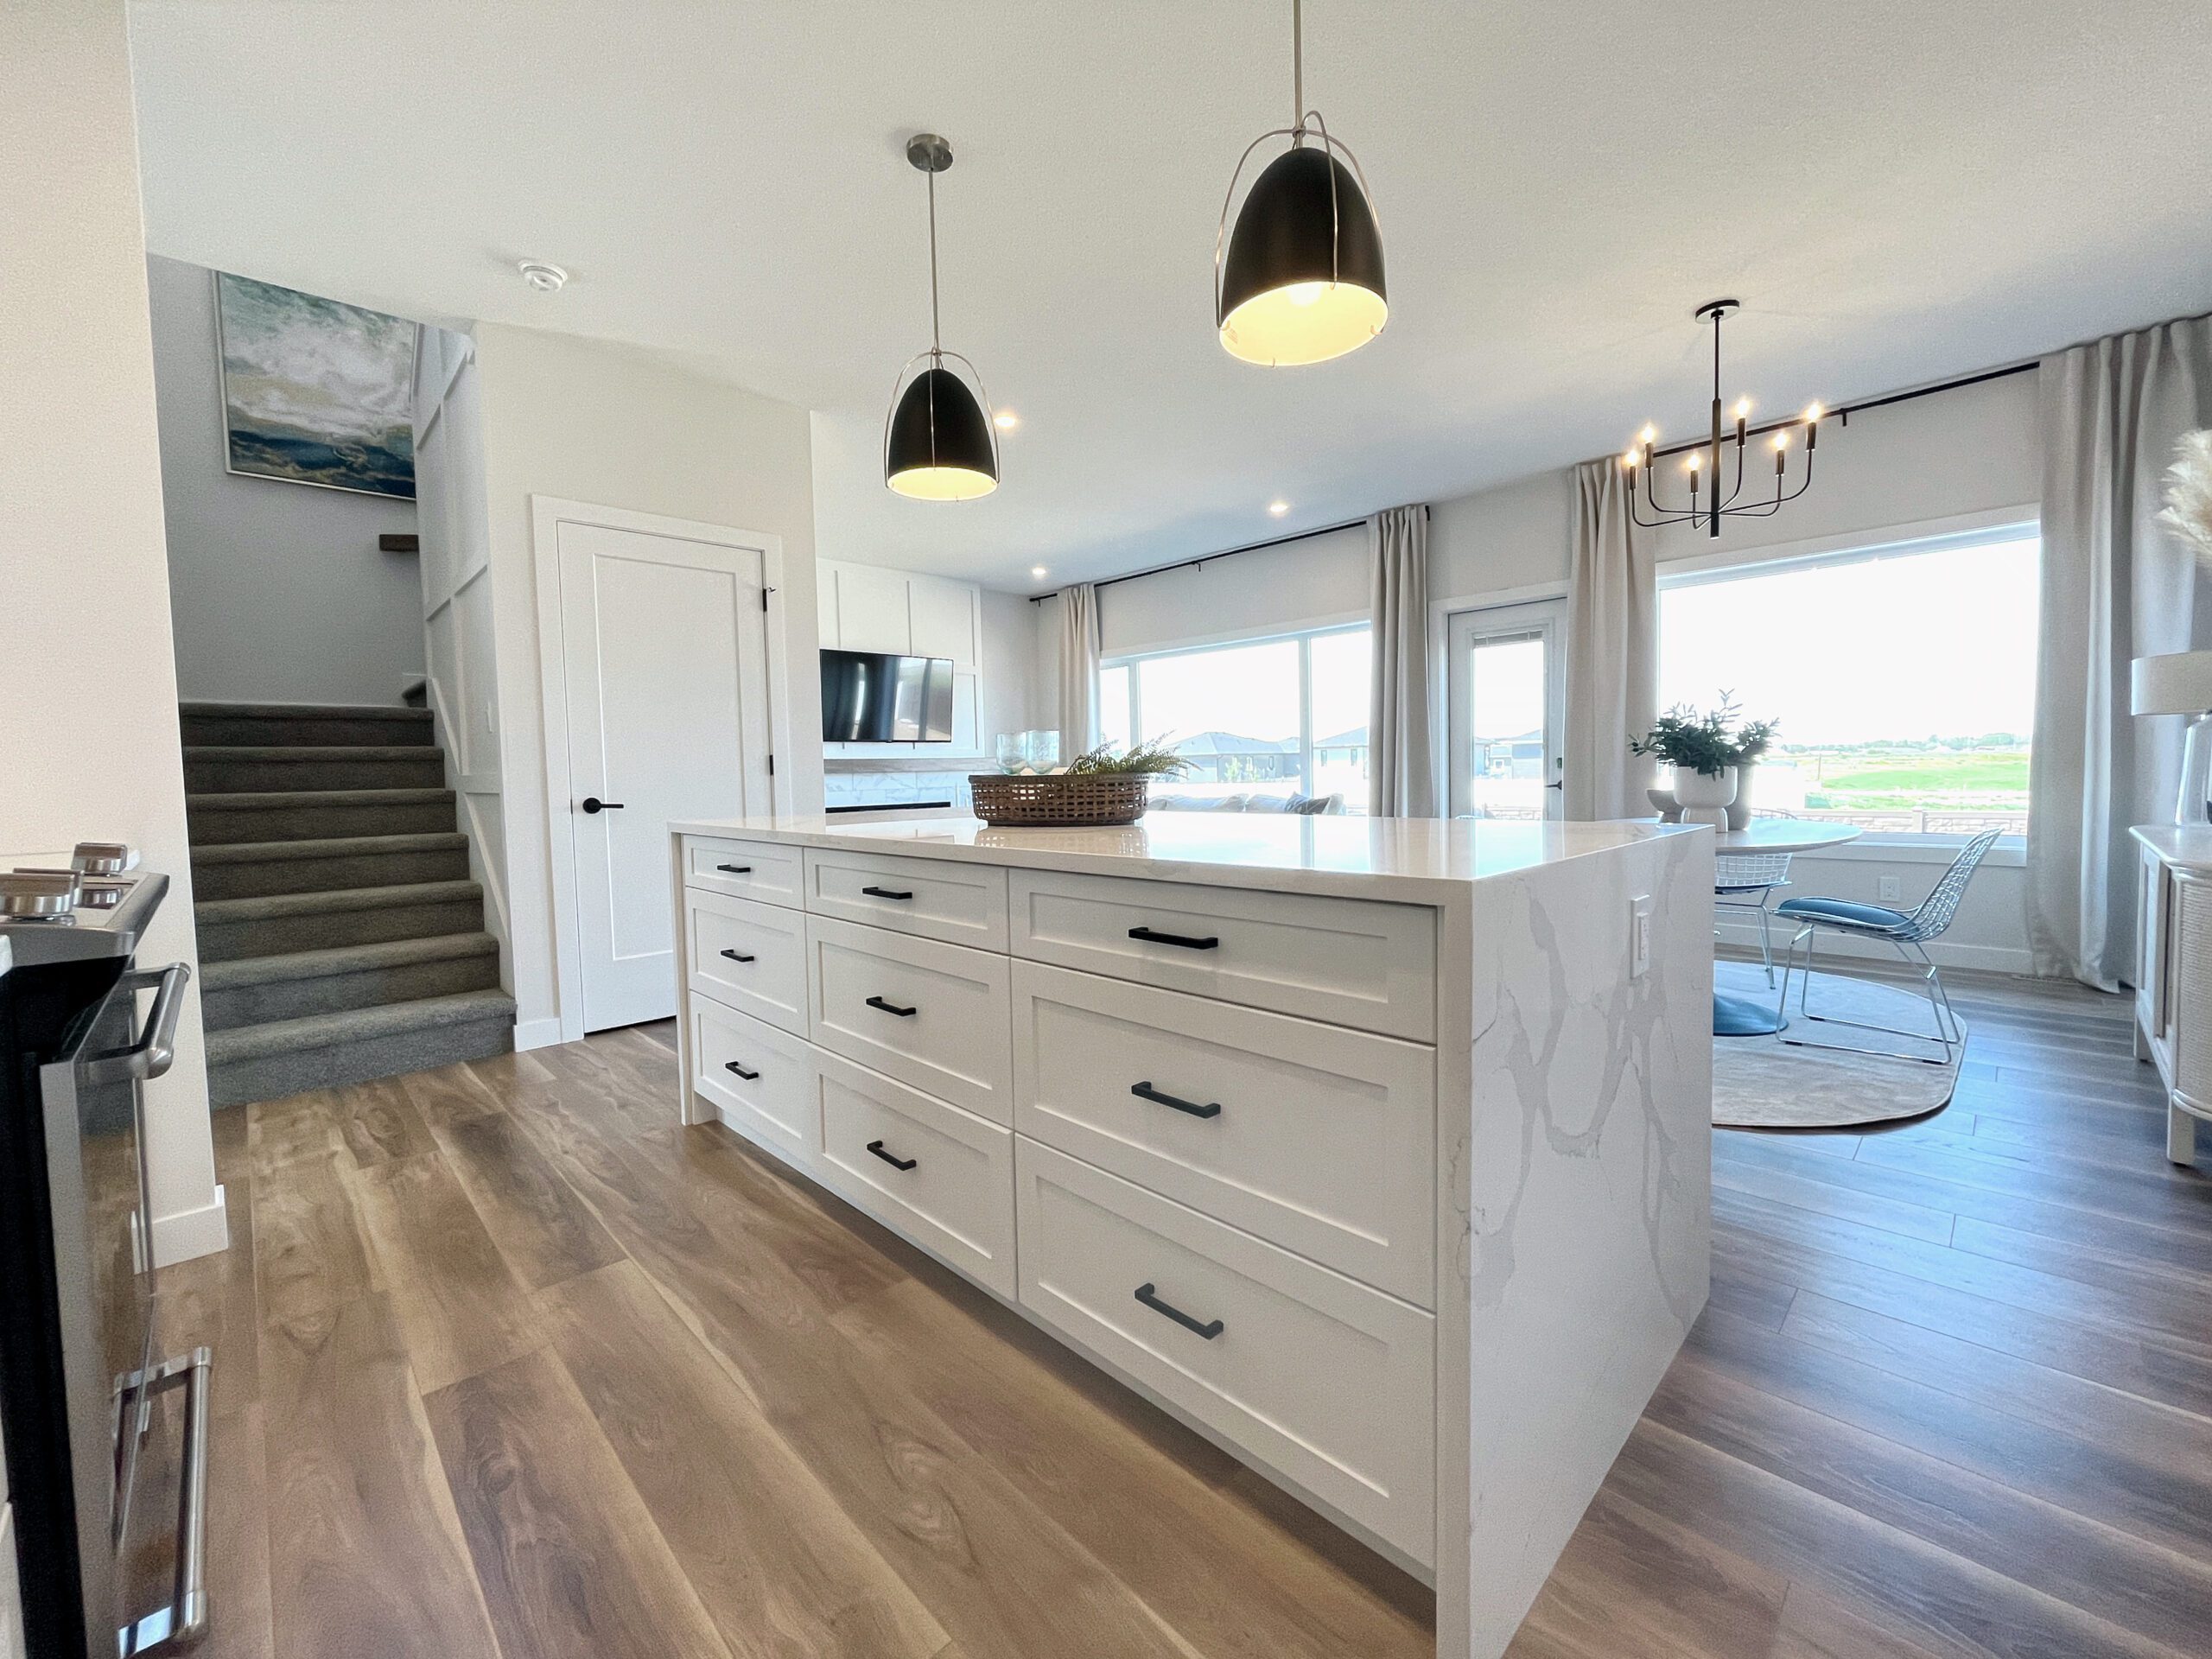 A two-storey home in Pilot Butte with white cabinets and hardwood floors.